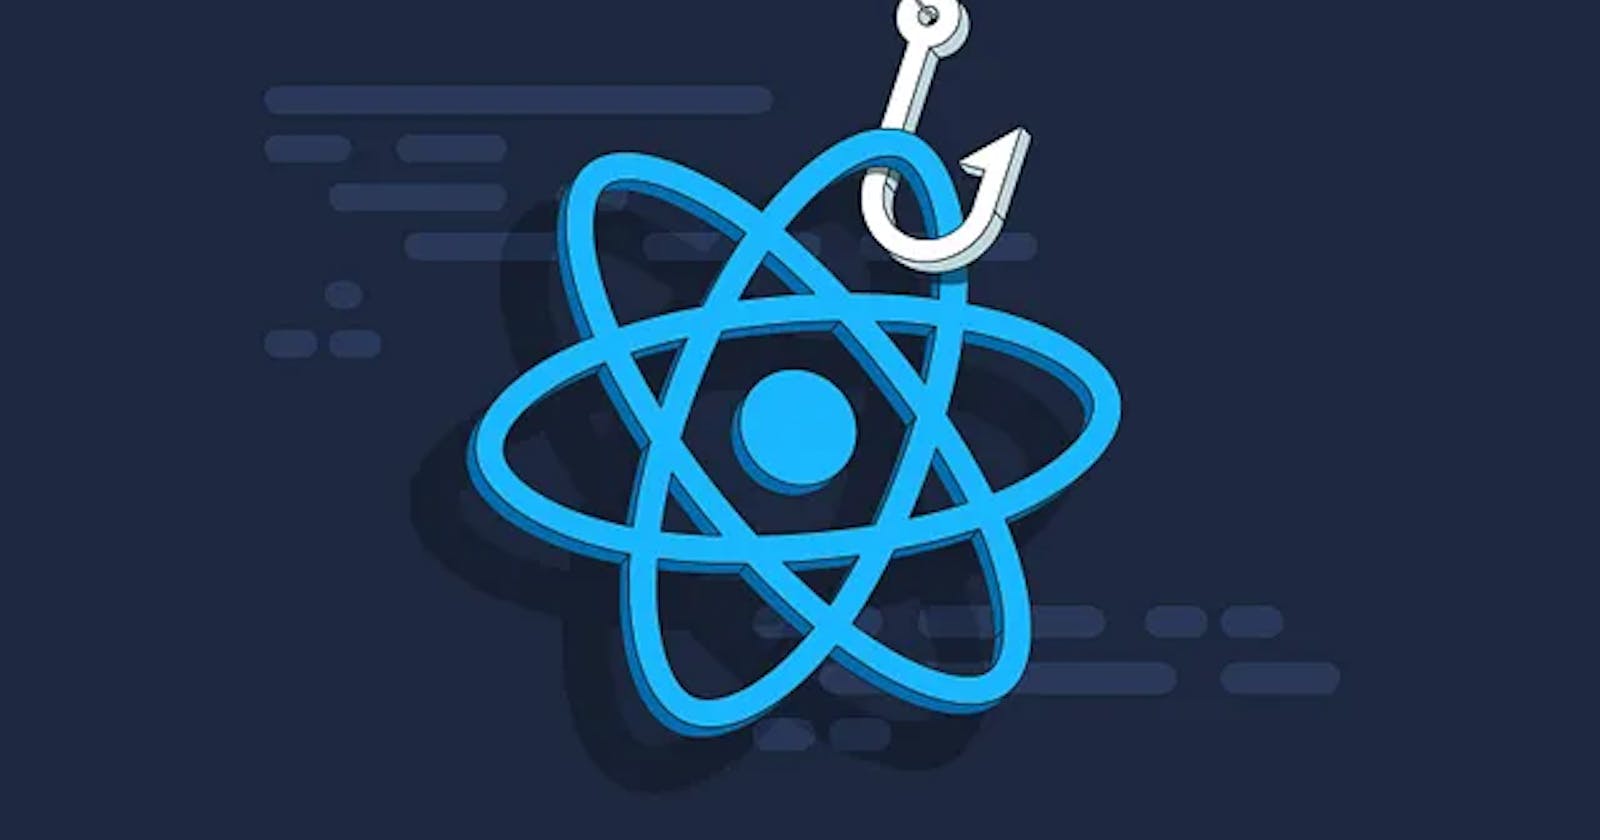 useImperativeHandle hook in React